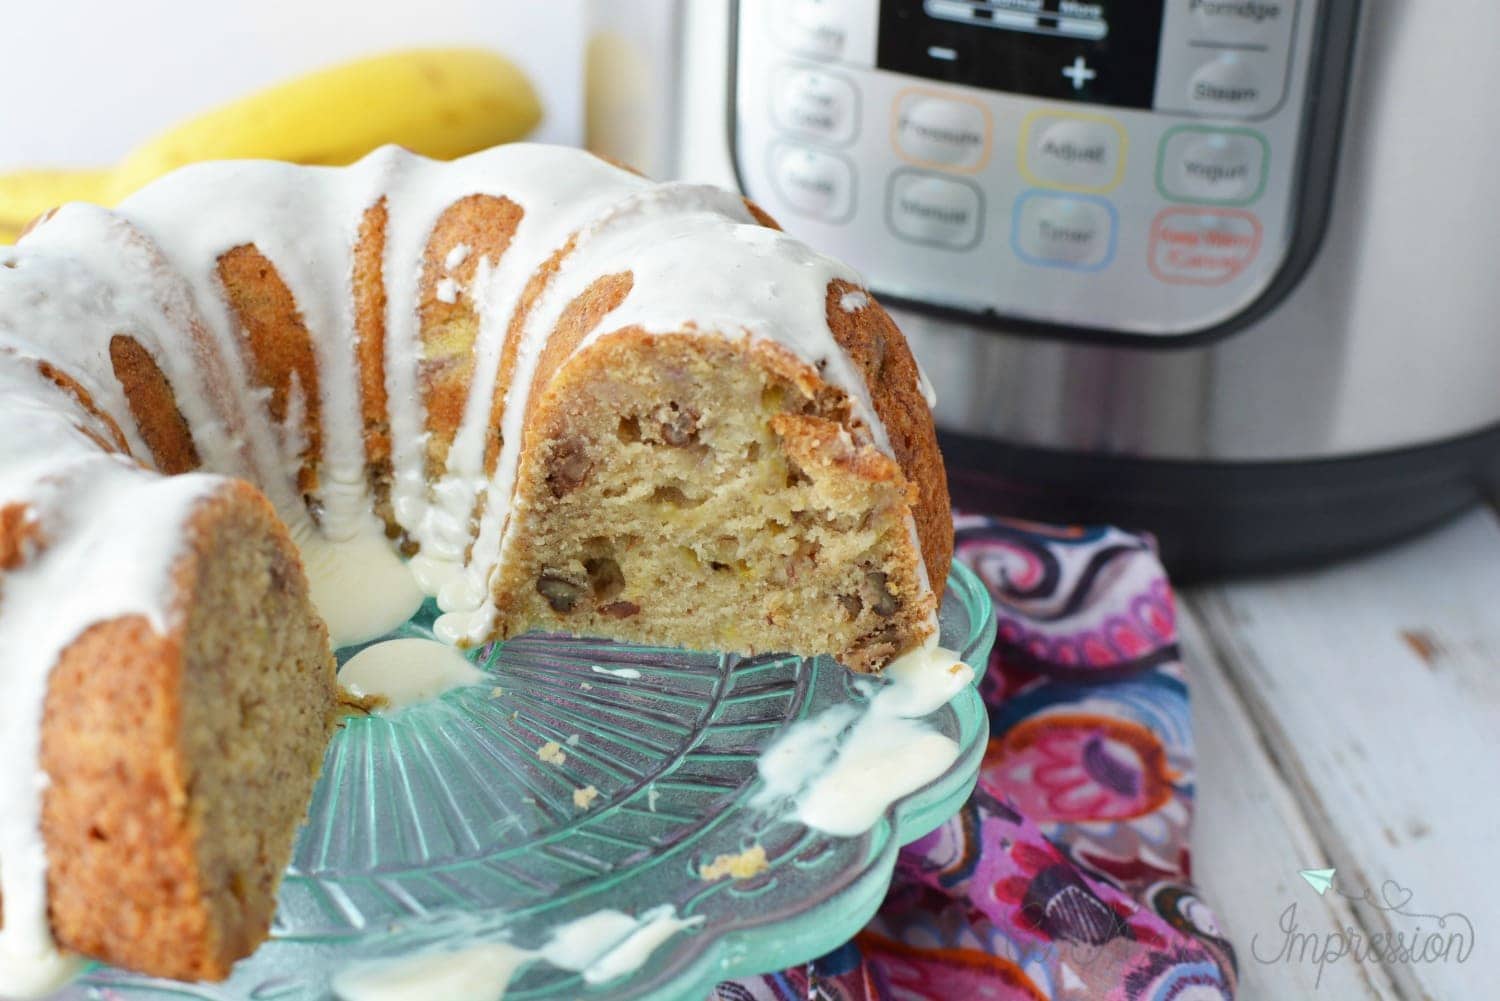 Instant Pot banana bread sitting on a plate next to a pressure cooker.